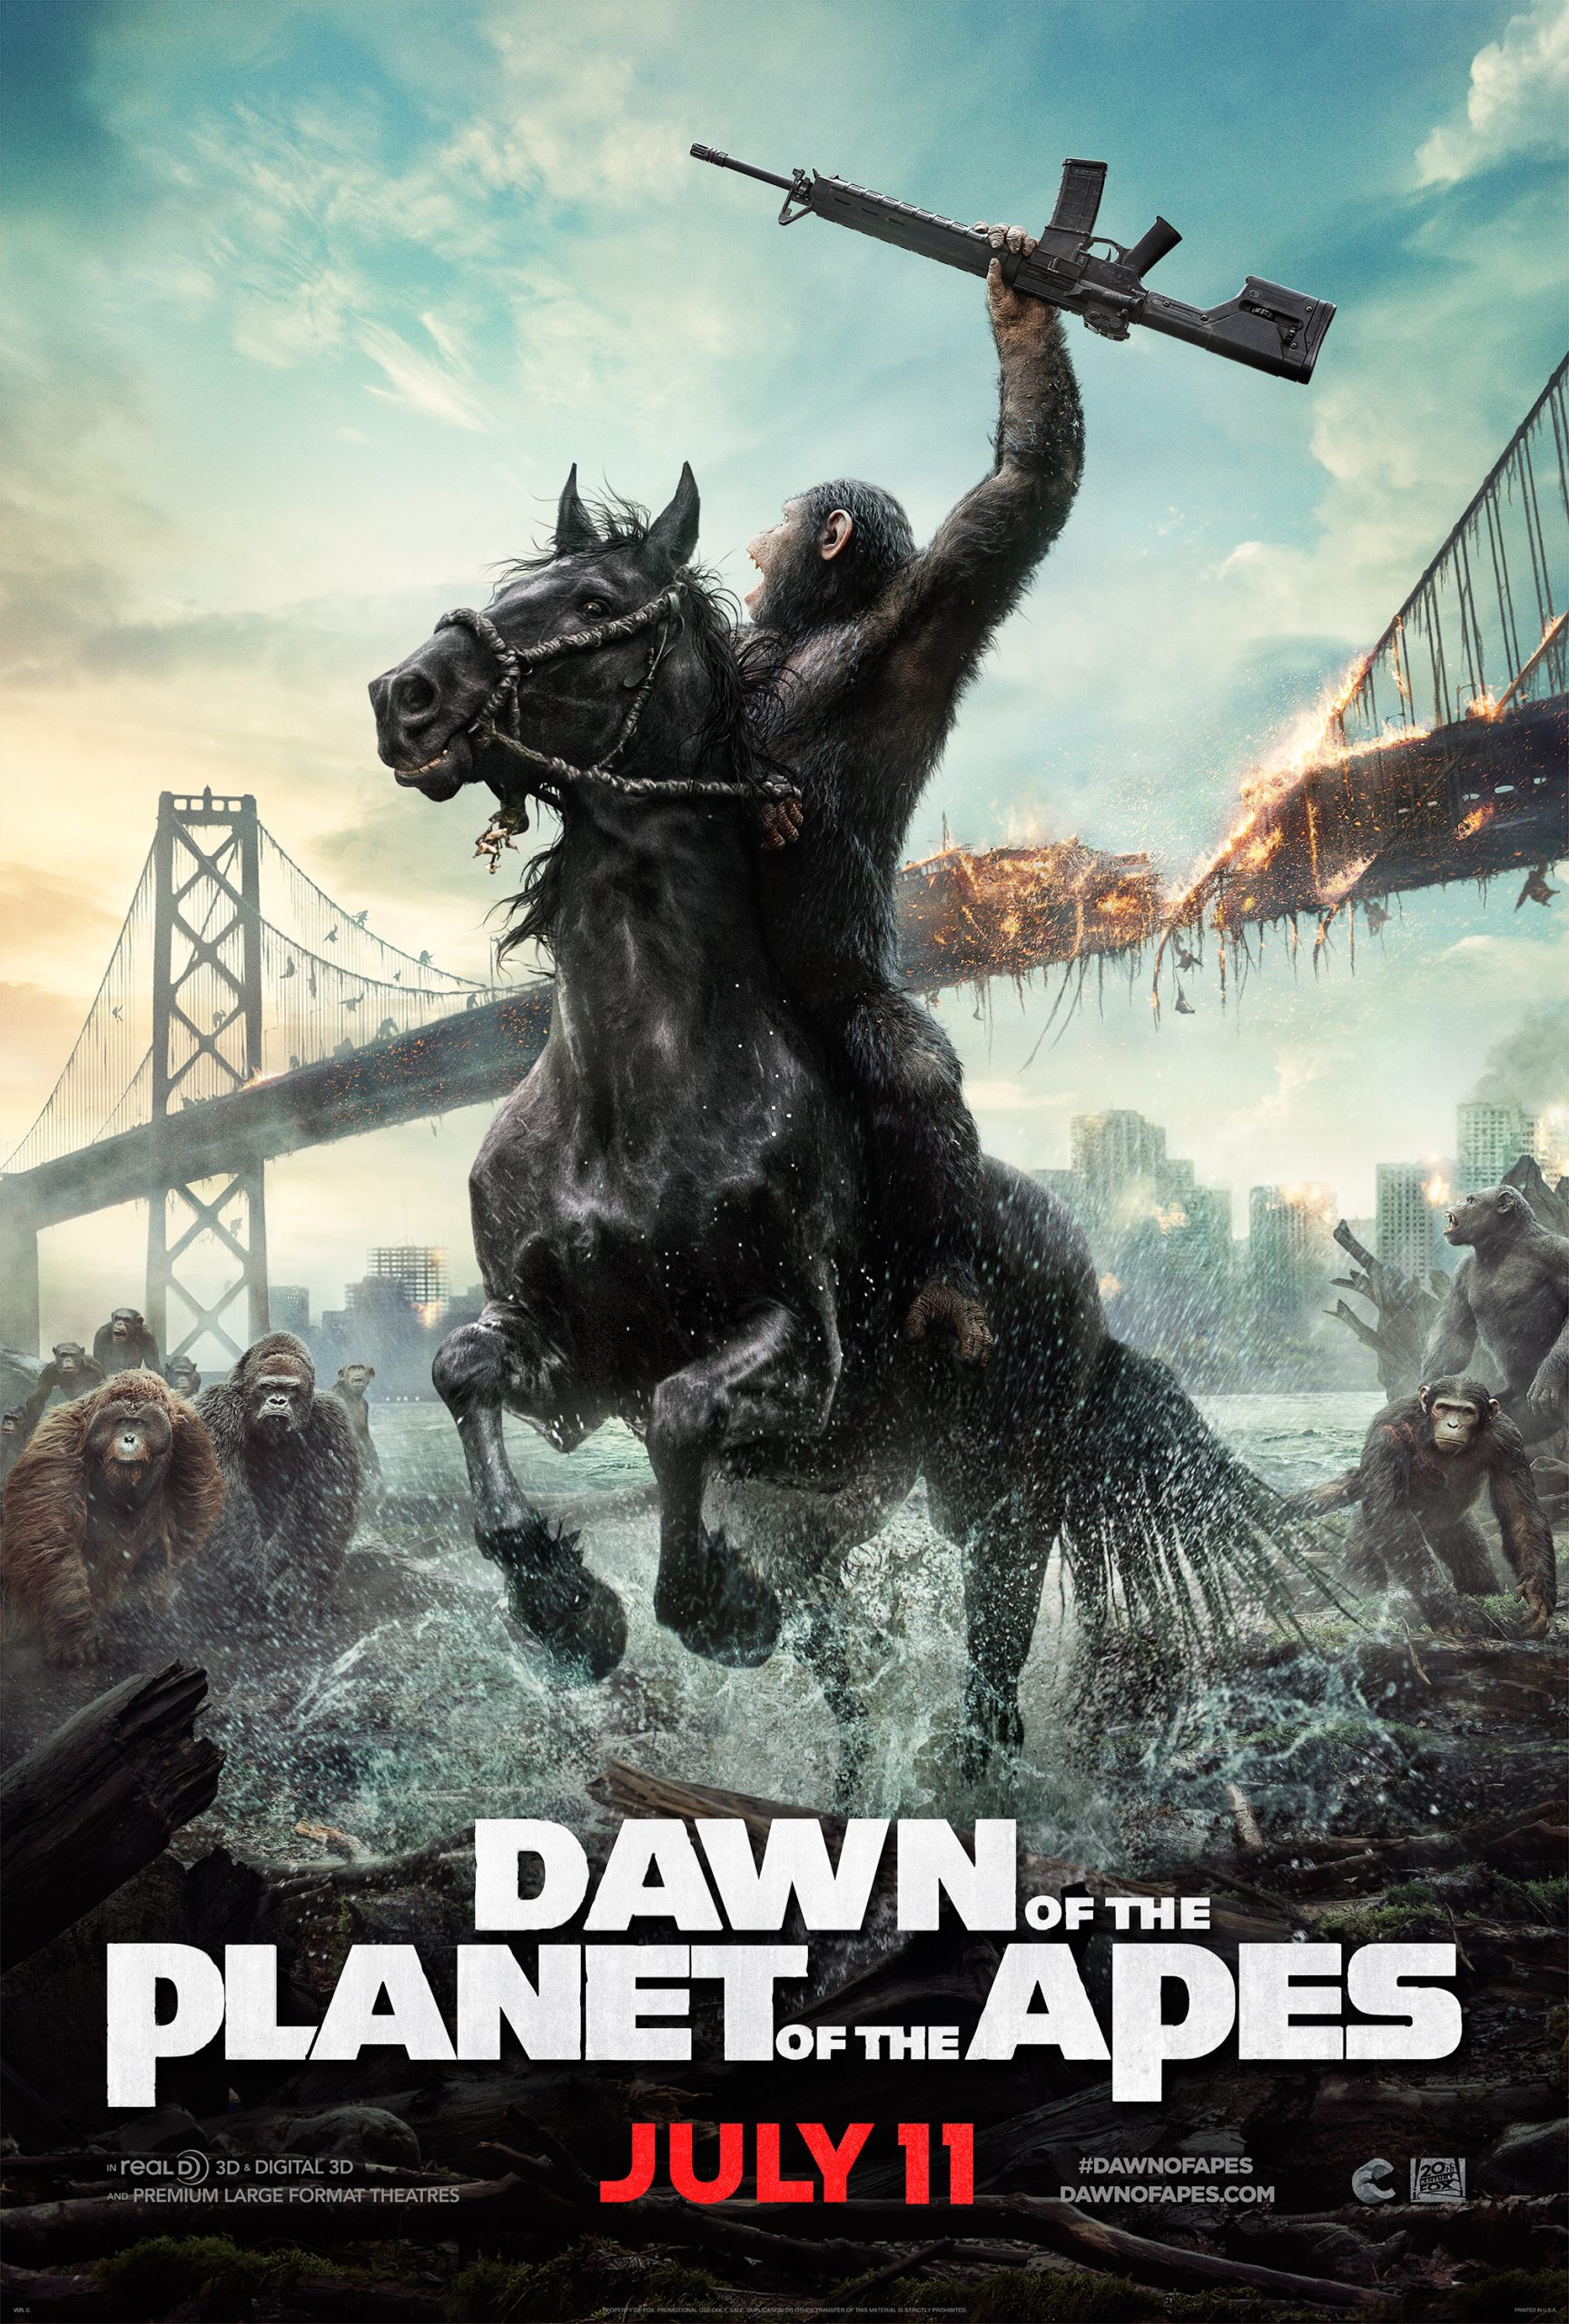 Dawn of the Planet of the Apes (2014) รุ่งอรุณแห่งพิภพวานร Gary Oldman